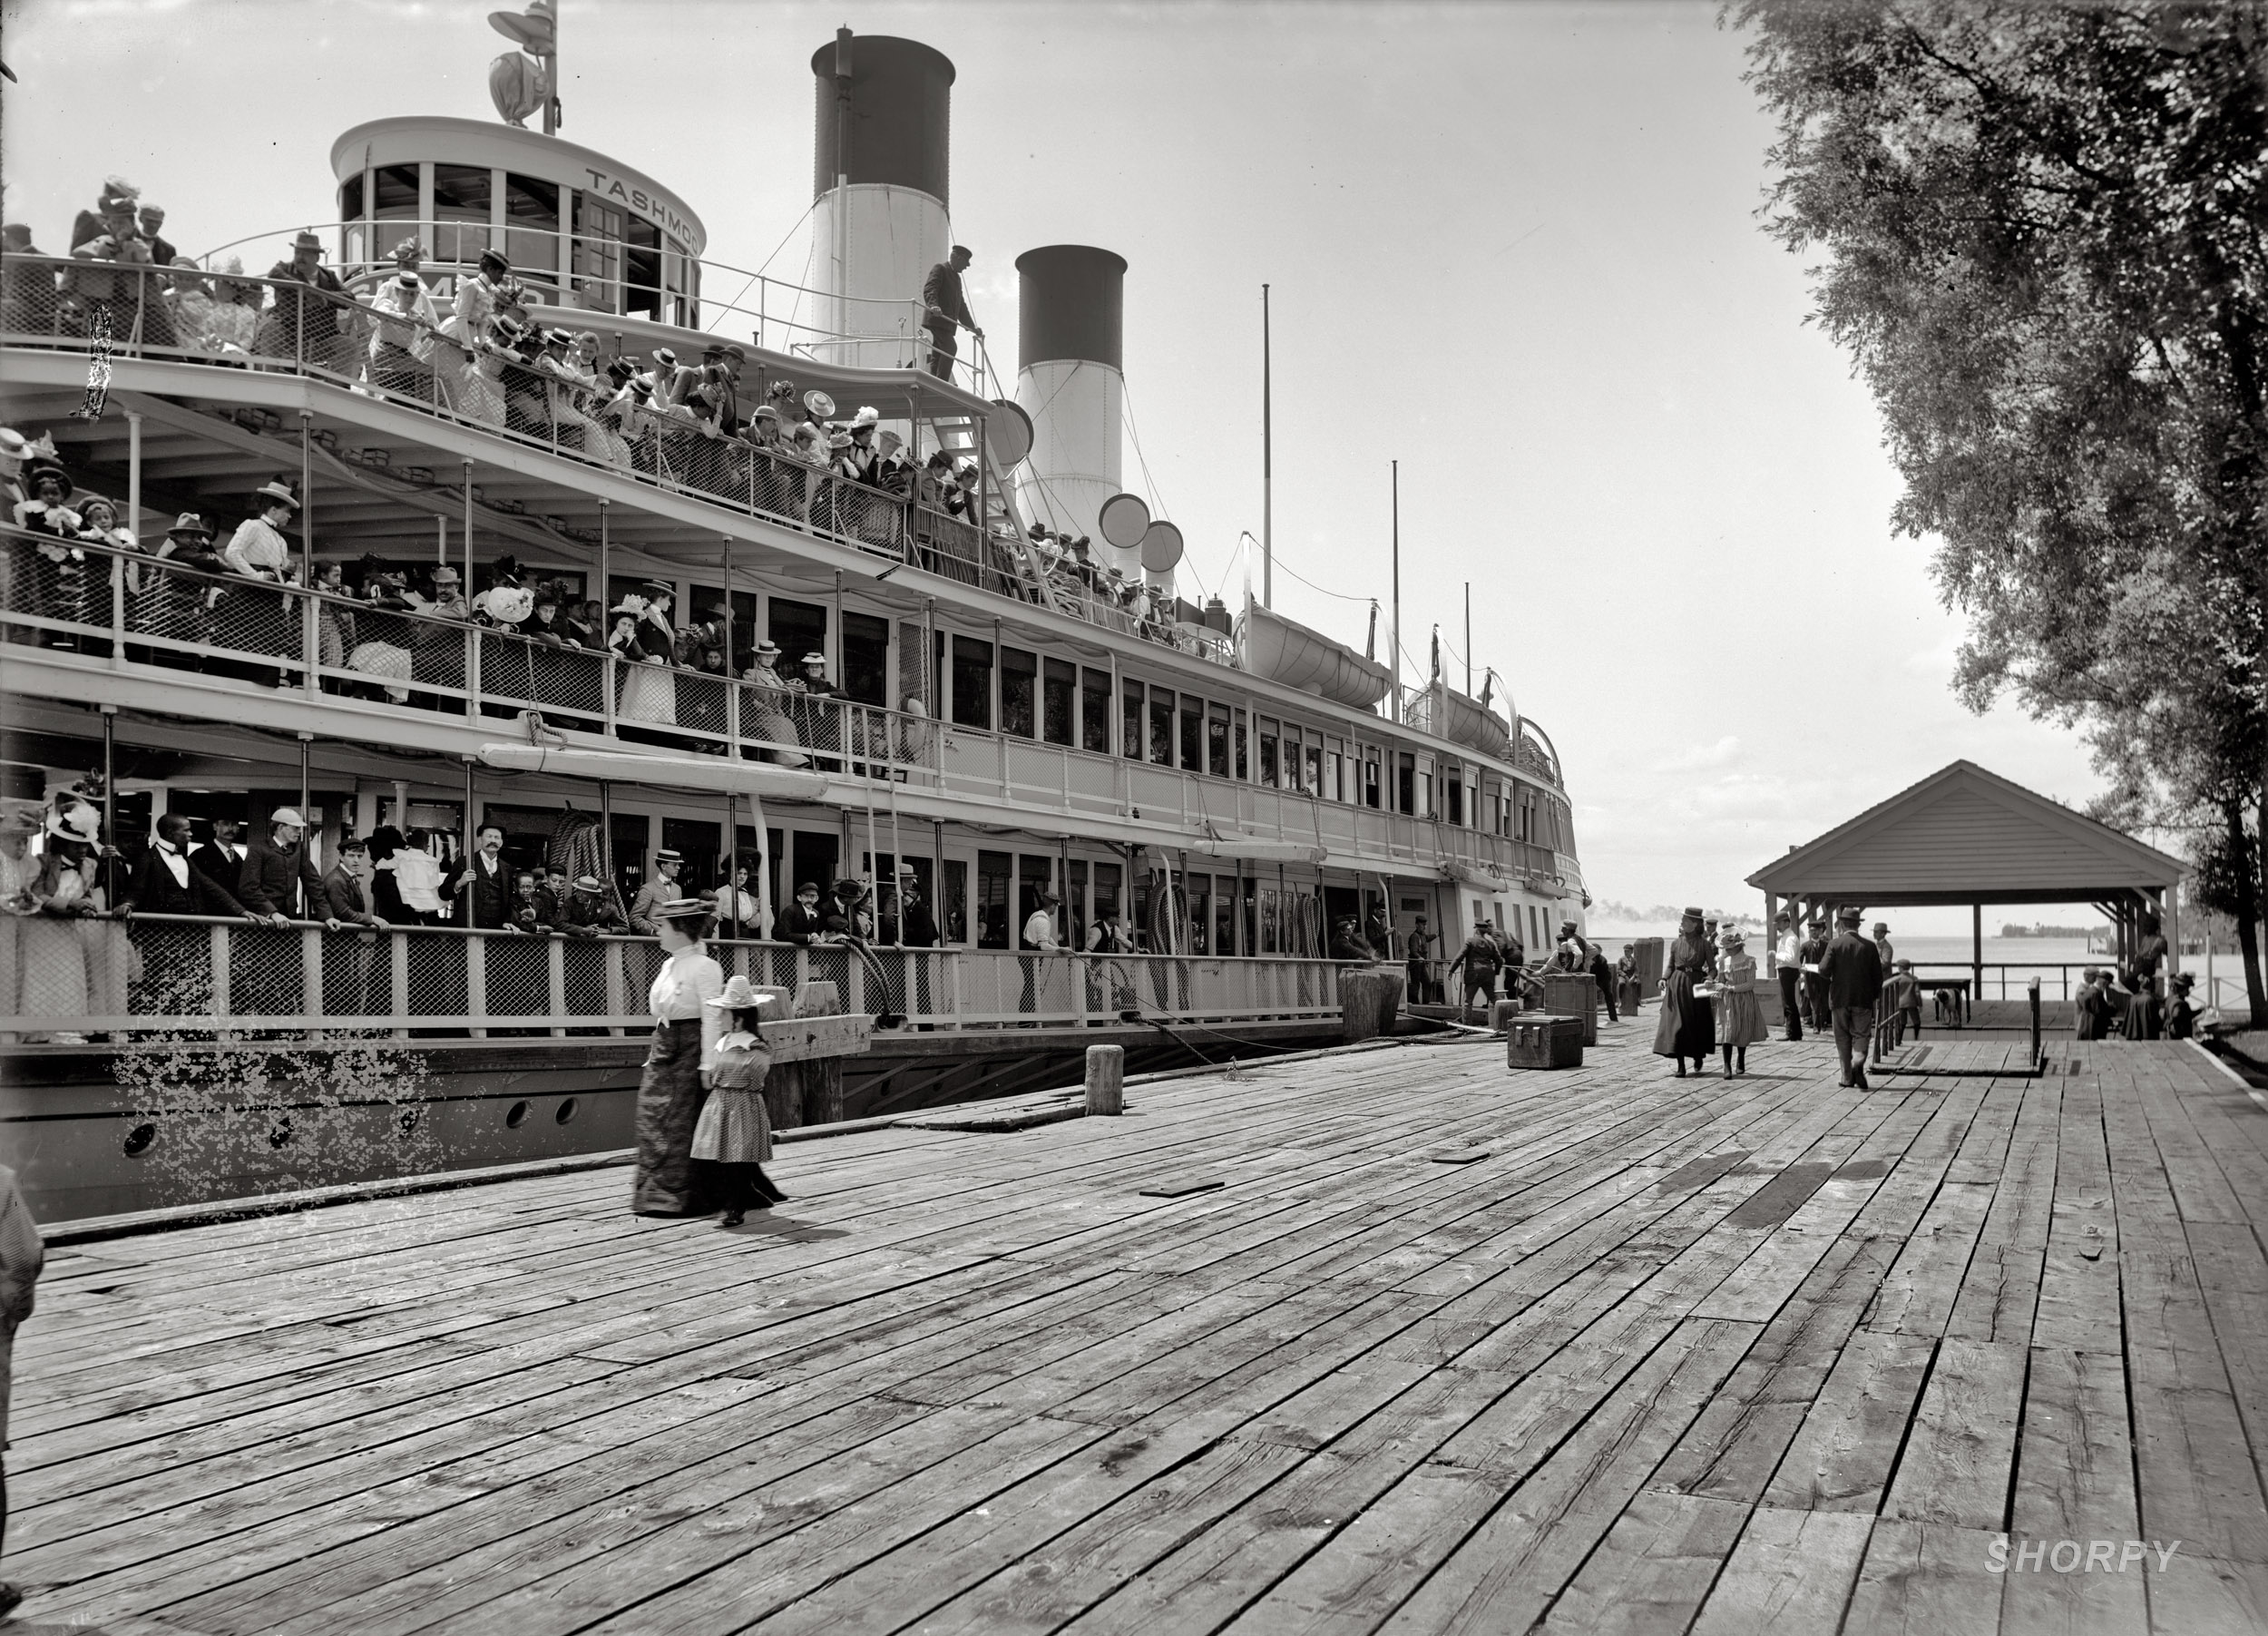 "Tashmoo at the dock, Star Island House, St. Clair Flats," c. 1900-1901. The Detroit River excursion steamer SS Tashmoo, a sidewheeler, stopped at Tashmoo Park on the St. Clair Flats on trips between Detroit and Port Huron. A high point in the boat's eventful 36-year life was the night in 1927 that she broke free of her moorings in a winter storm and headed downriver on her own. Her end came in 1936, when she hit a submerged rock and sank. View full size.